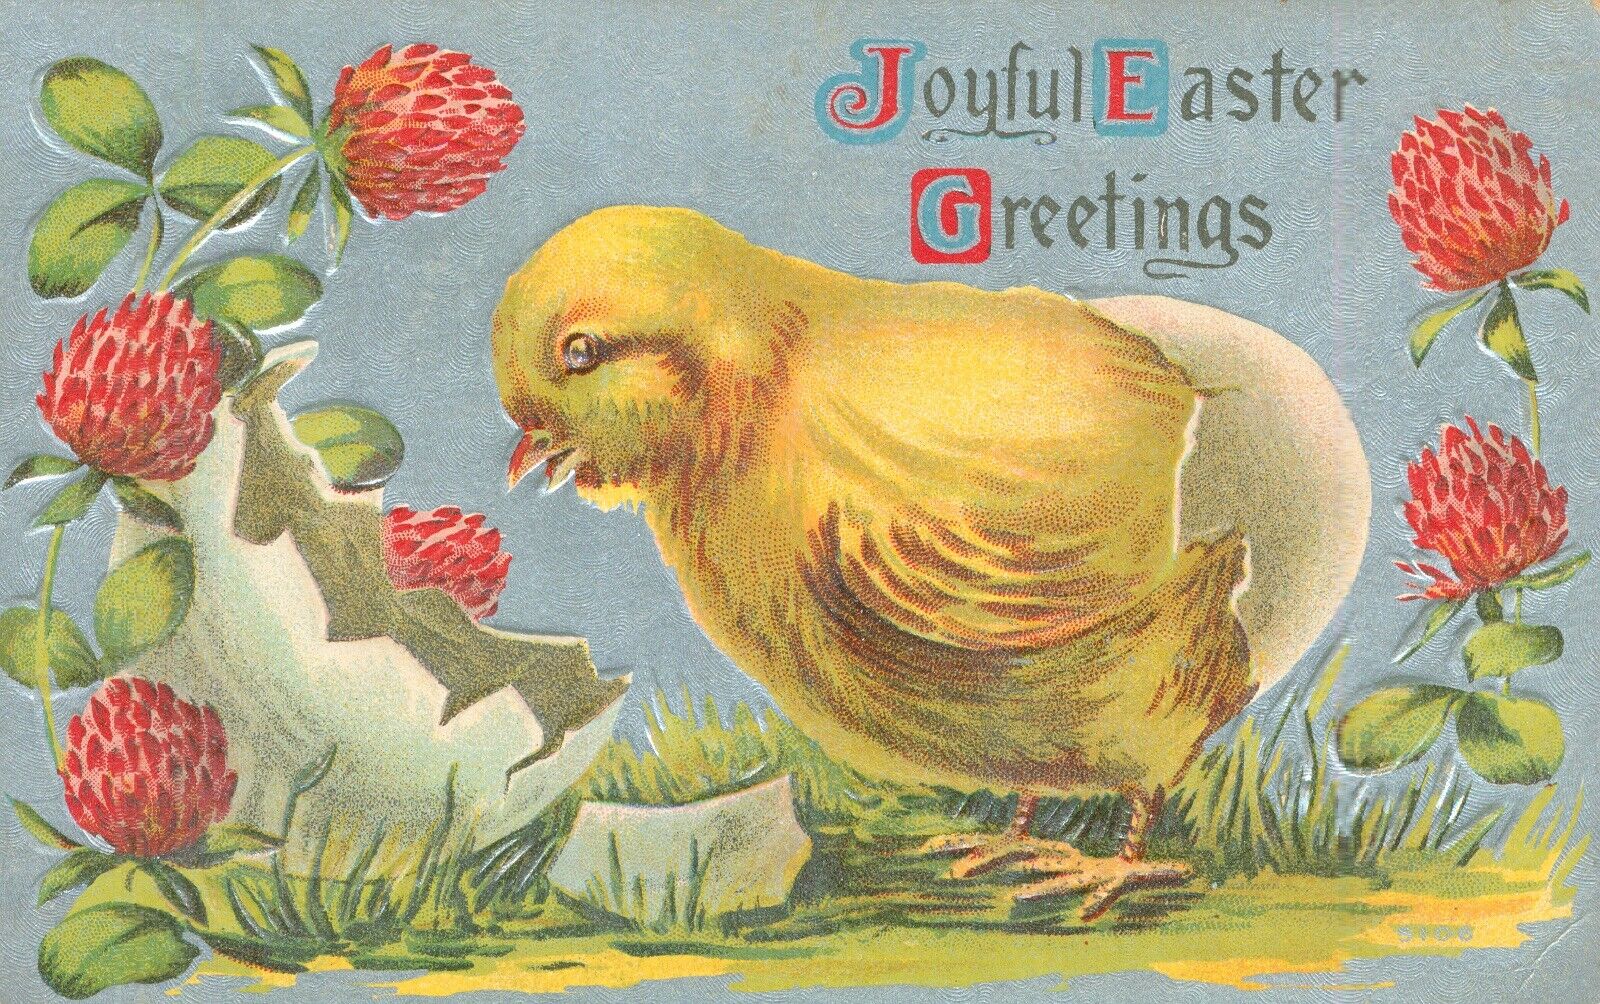 1910 EMBOSSED Antique POSTCARD Adorable CHIC with Shell Joyful EASTER Greetings